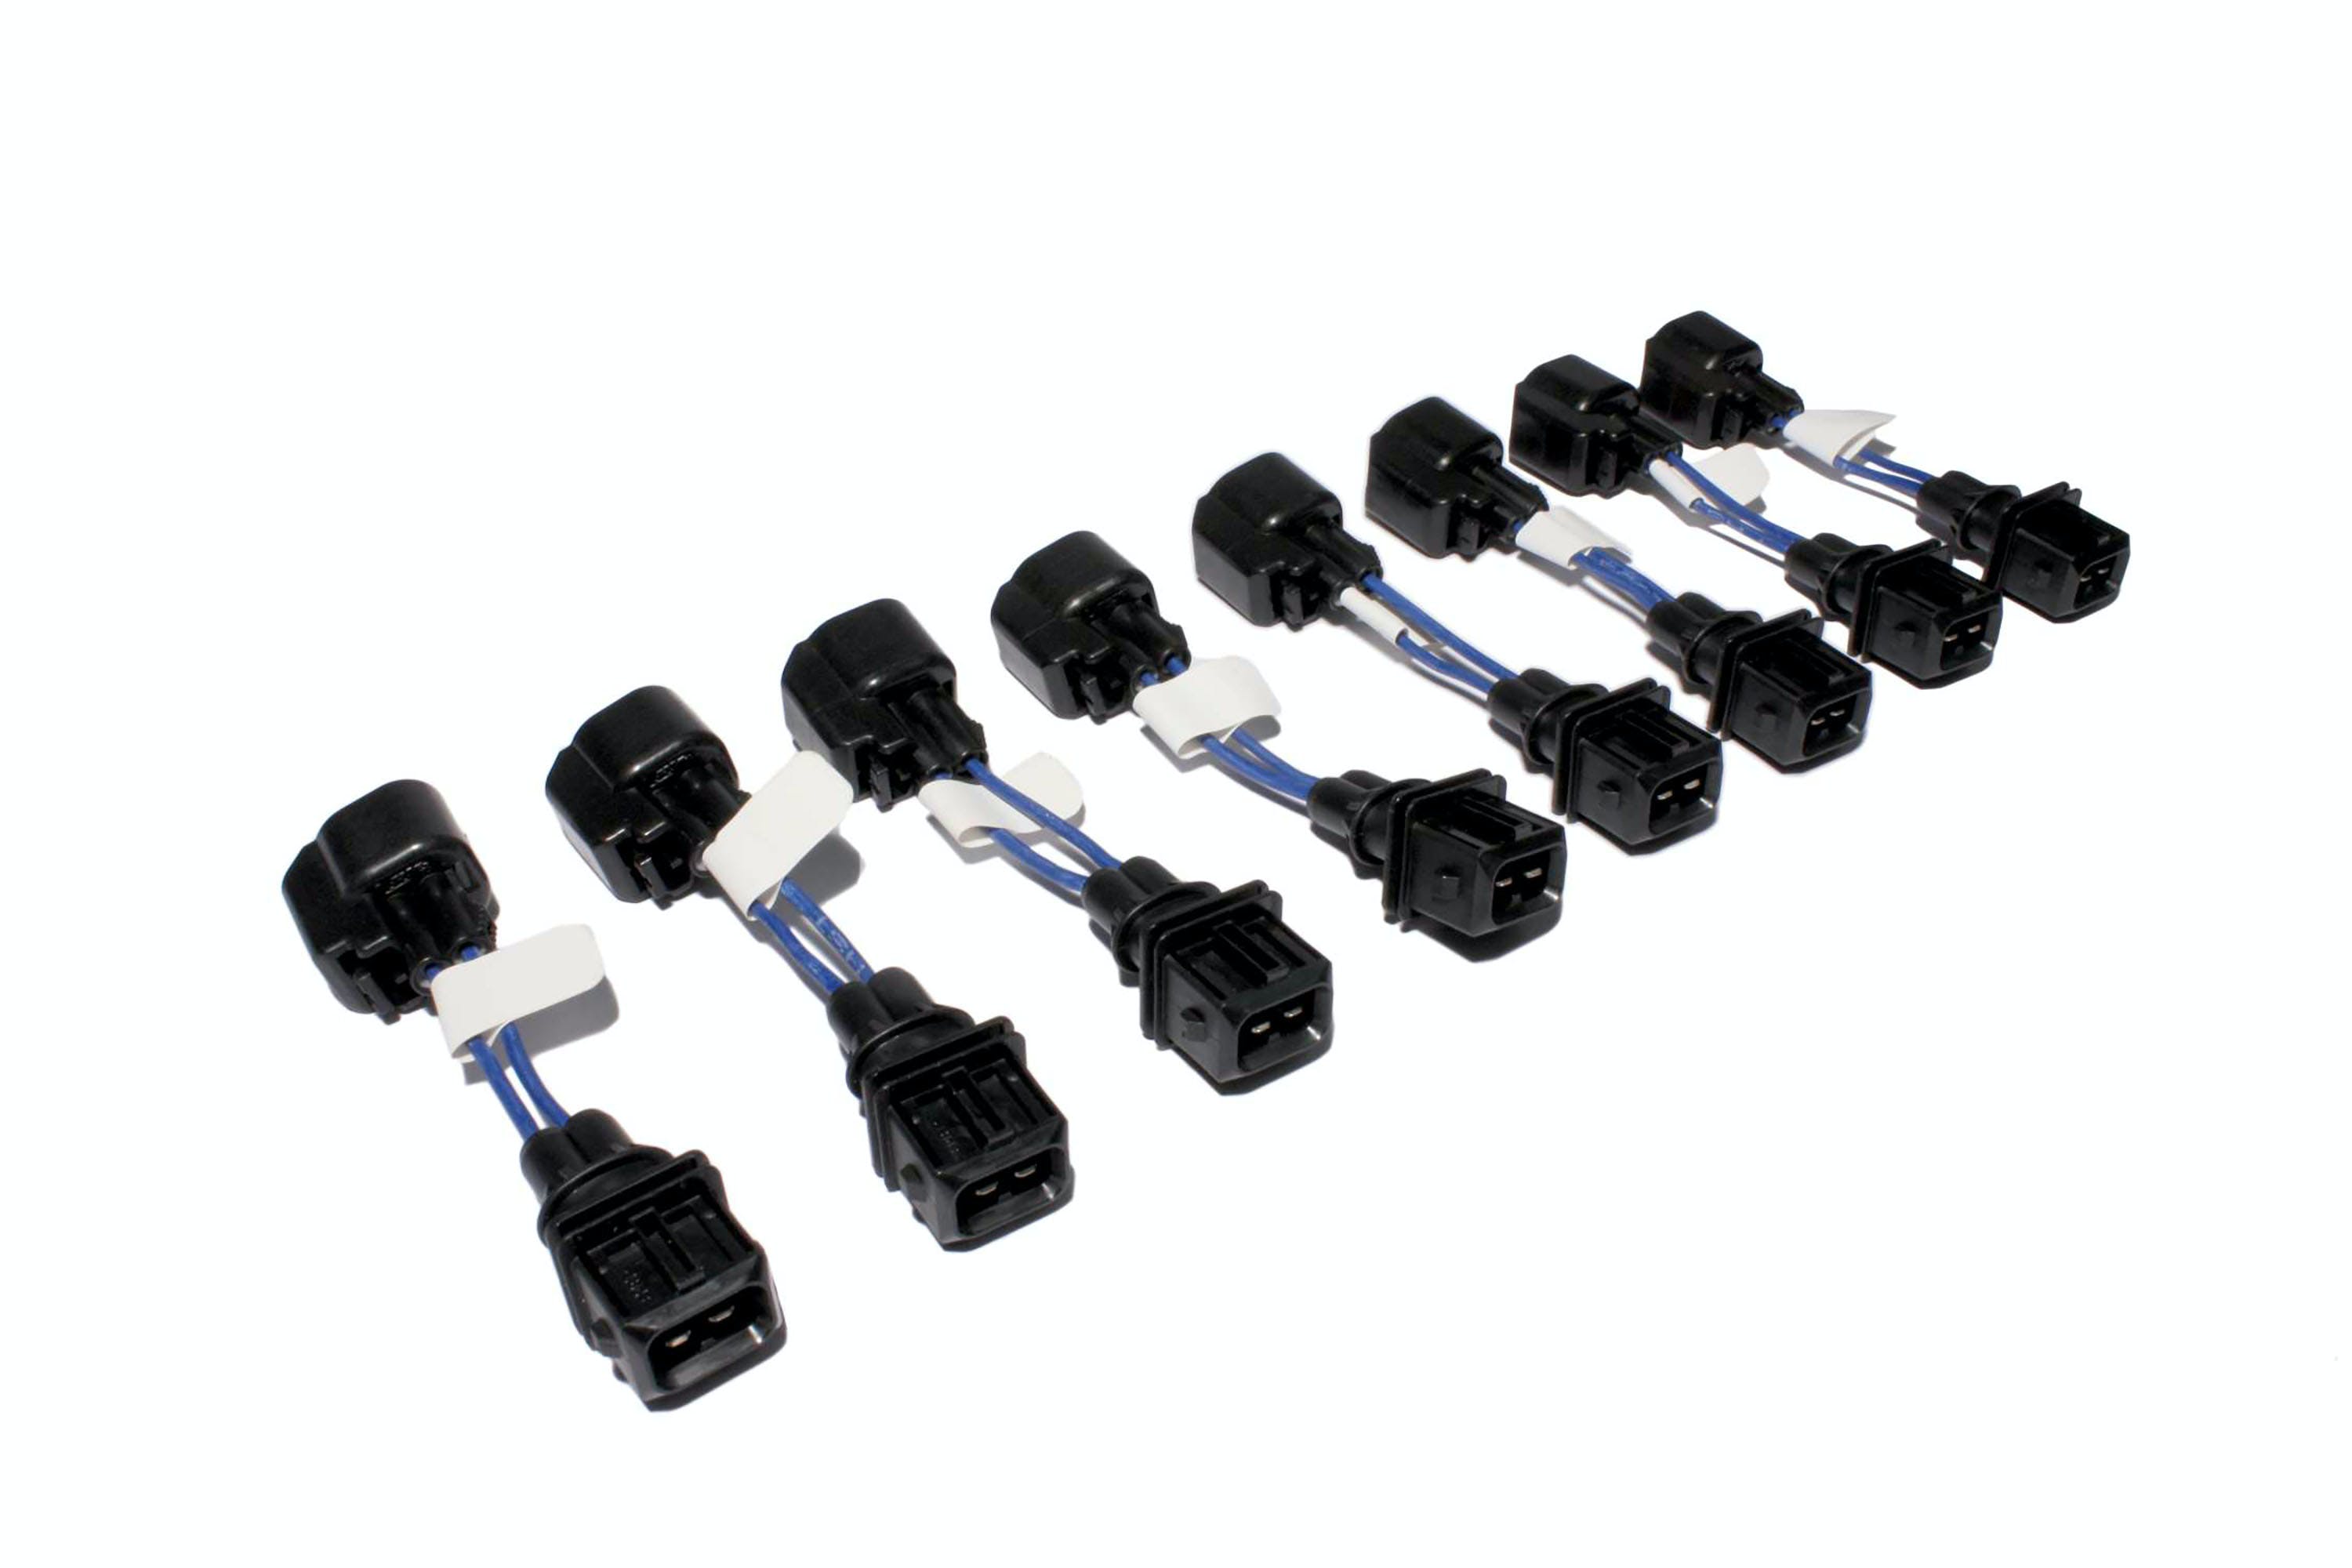 FAST - Fuel Air Spark Technology 170604-8 Adapts USCAR/EV6 Injector to Minitimer/EV1 Injector Harness (8 Pack)